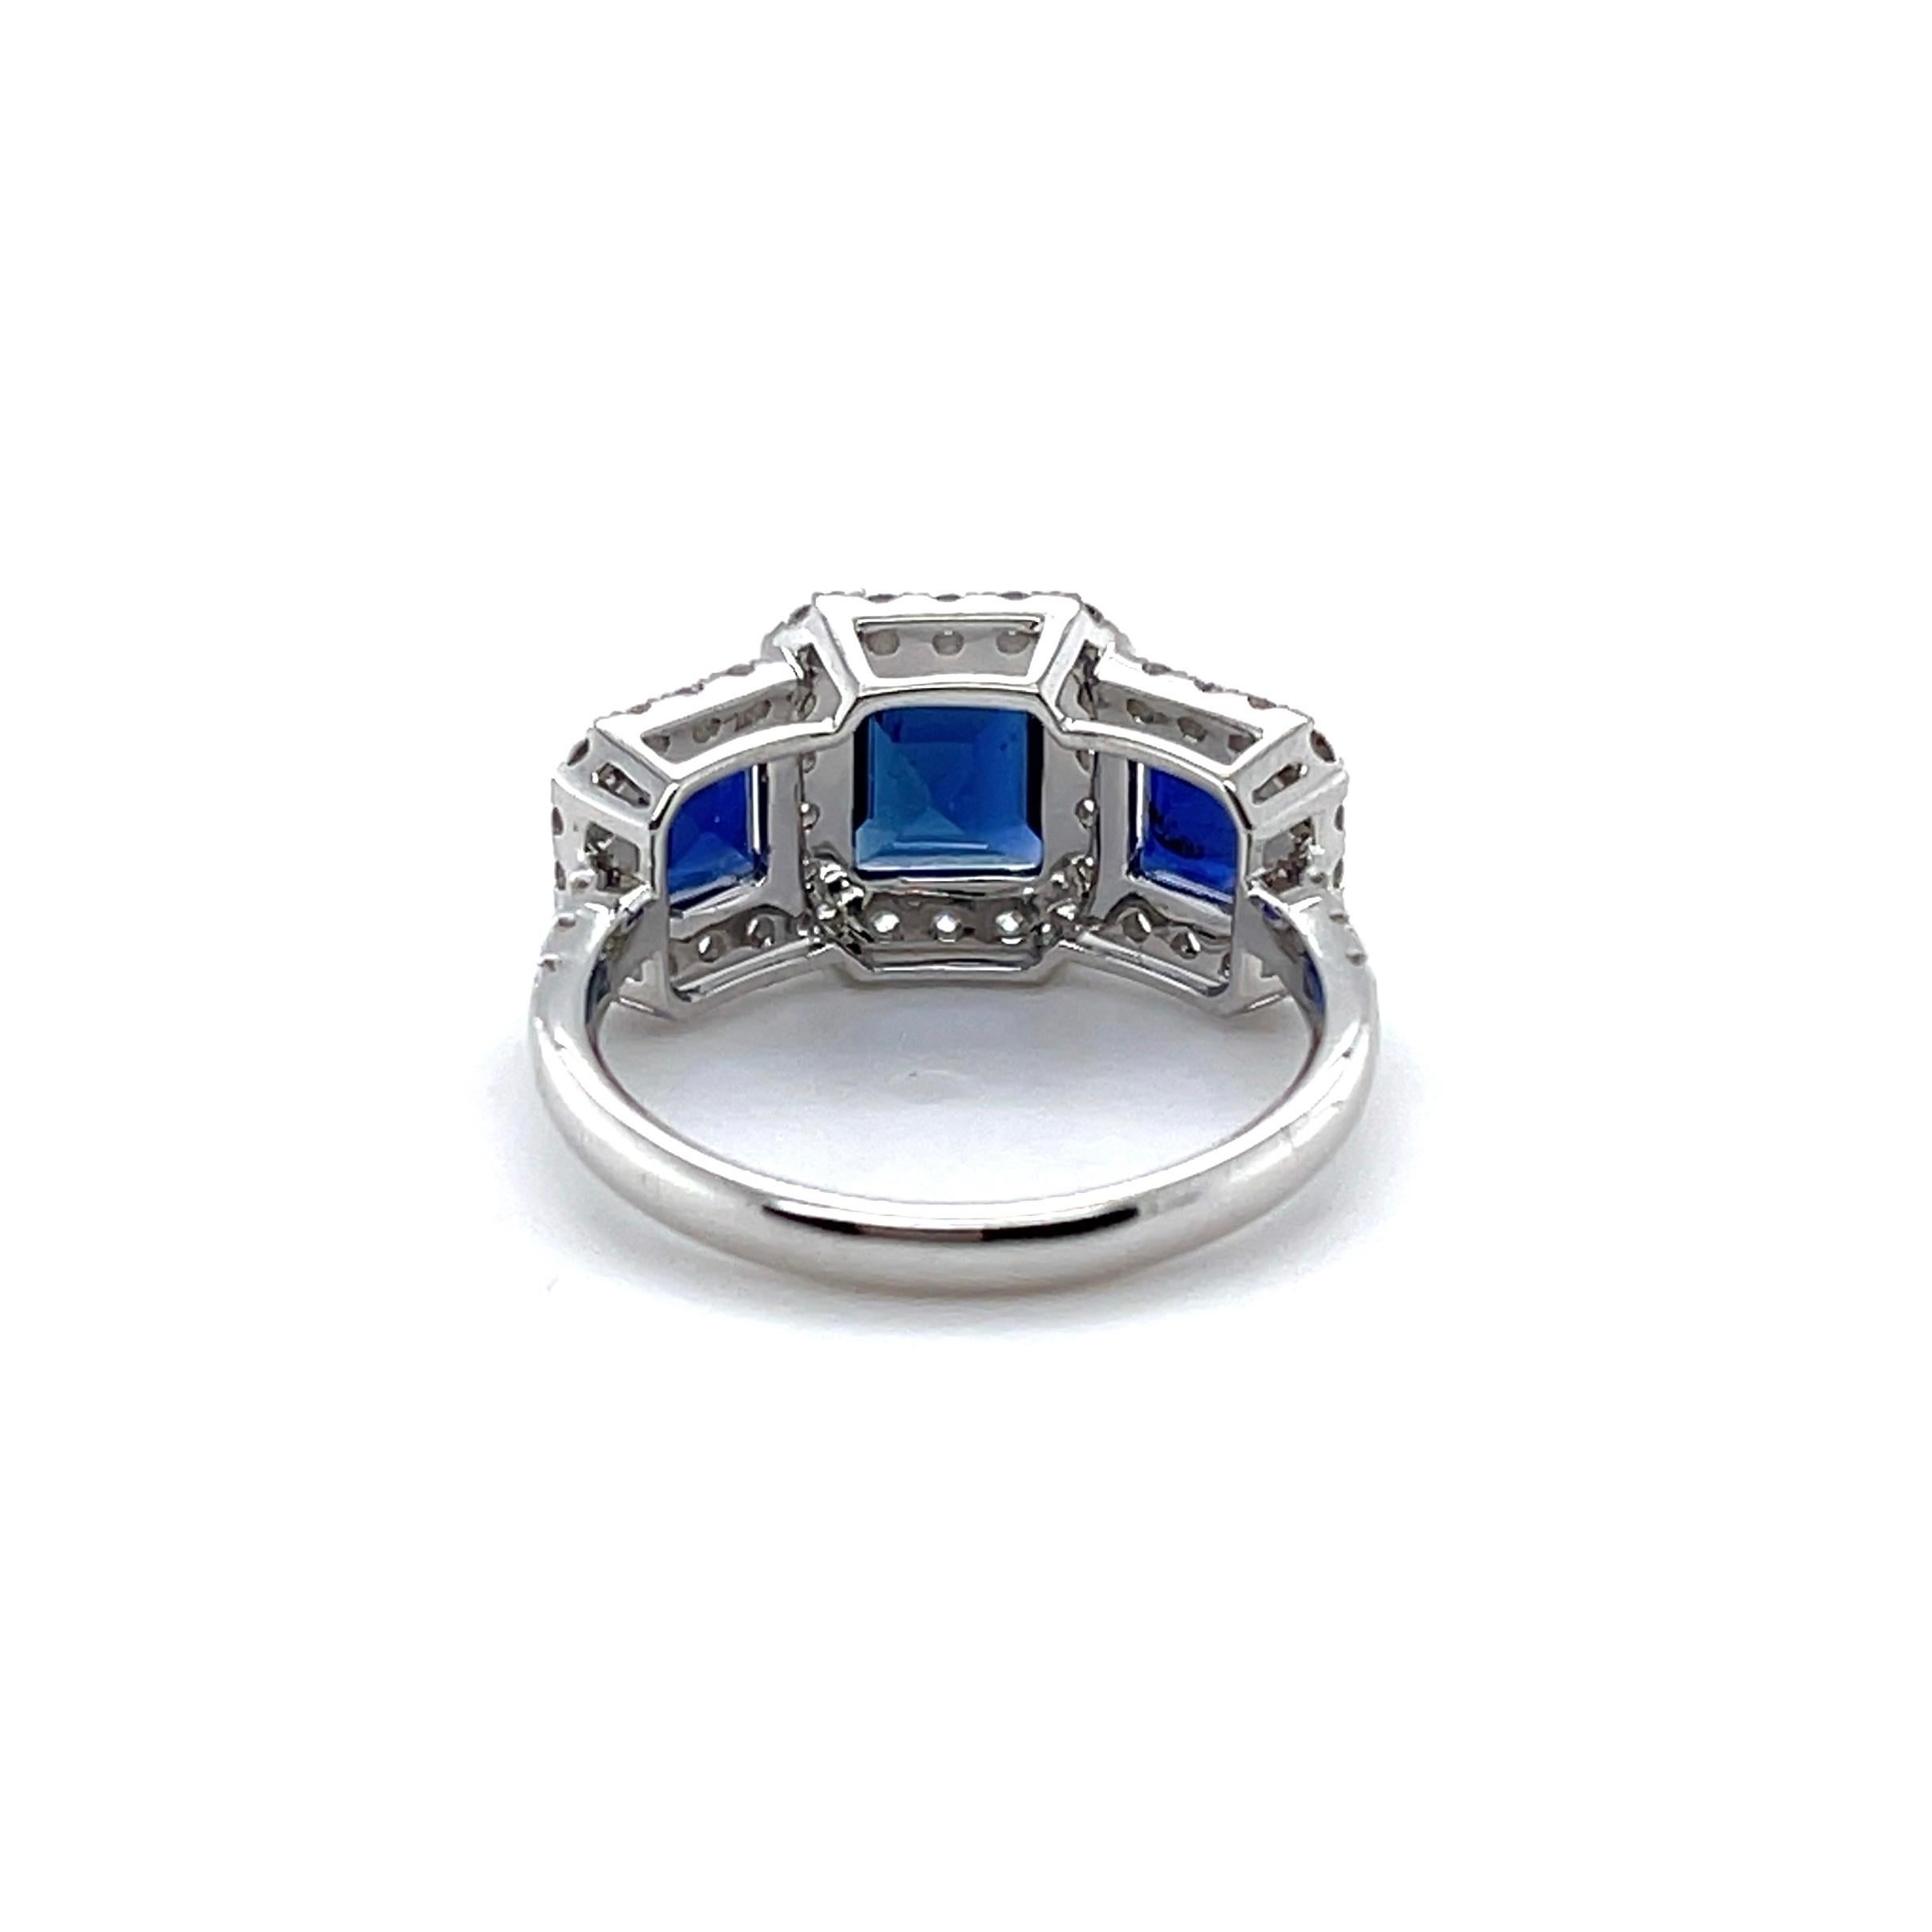 For Sale:  Imperial Jewels 18ct White Gold Trilogy Burmese Blue Sapphire & Diamond Ring 8